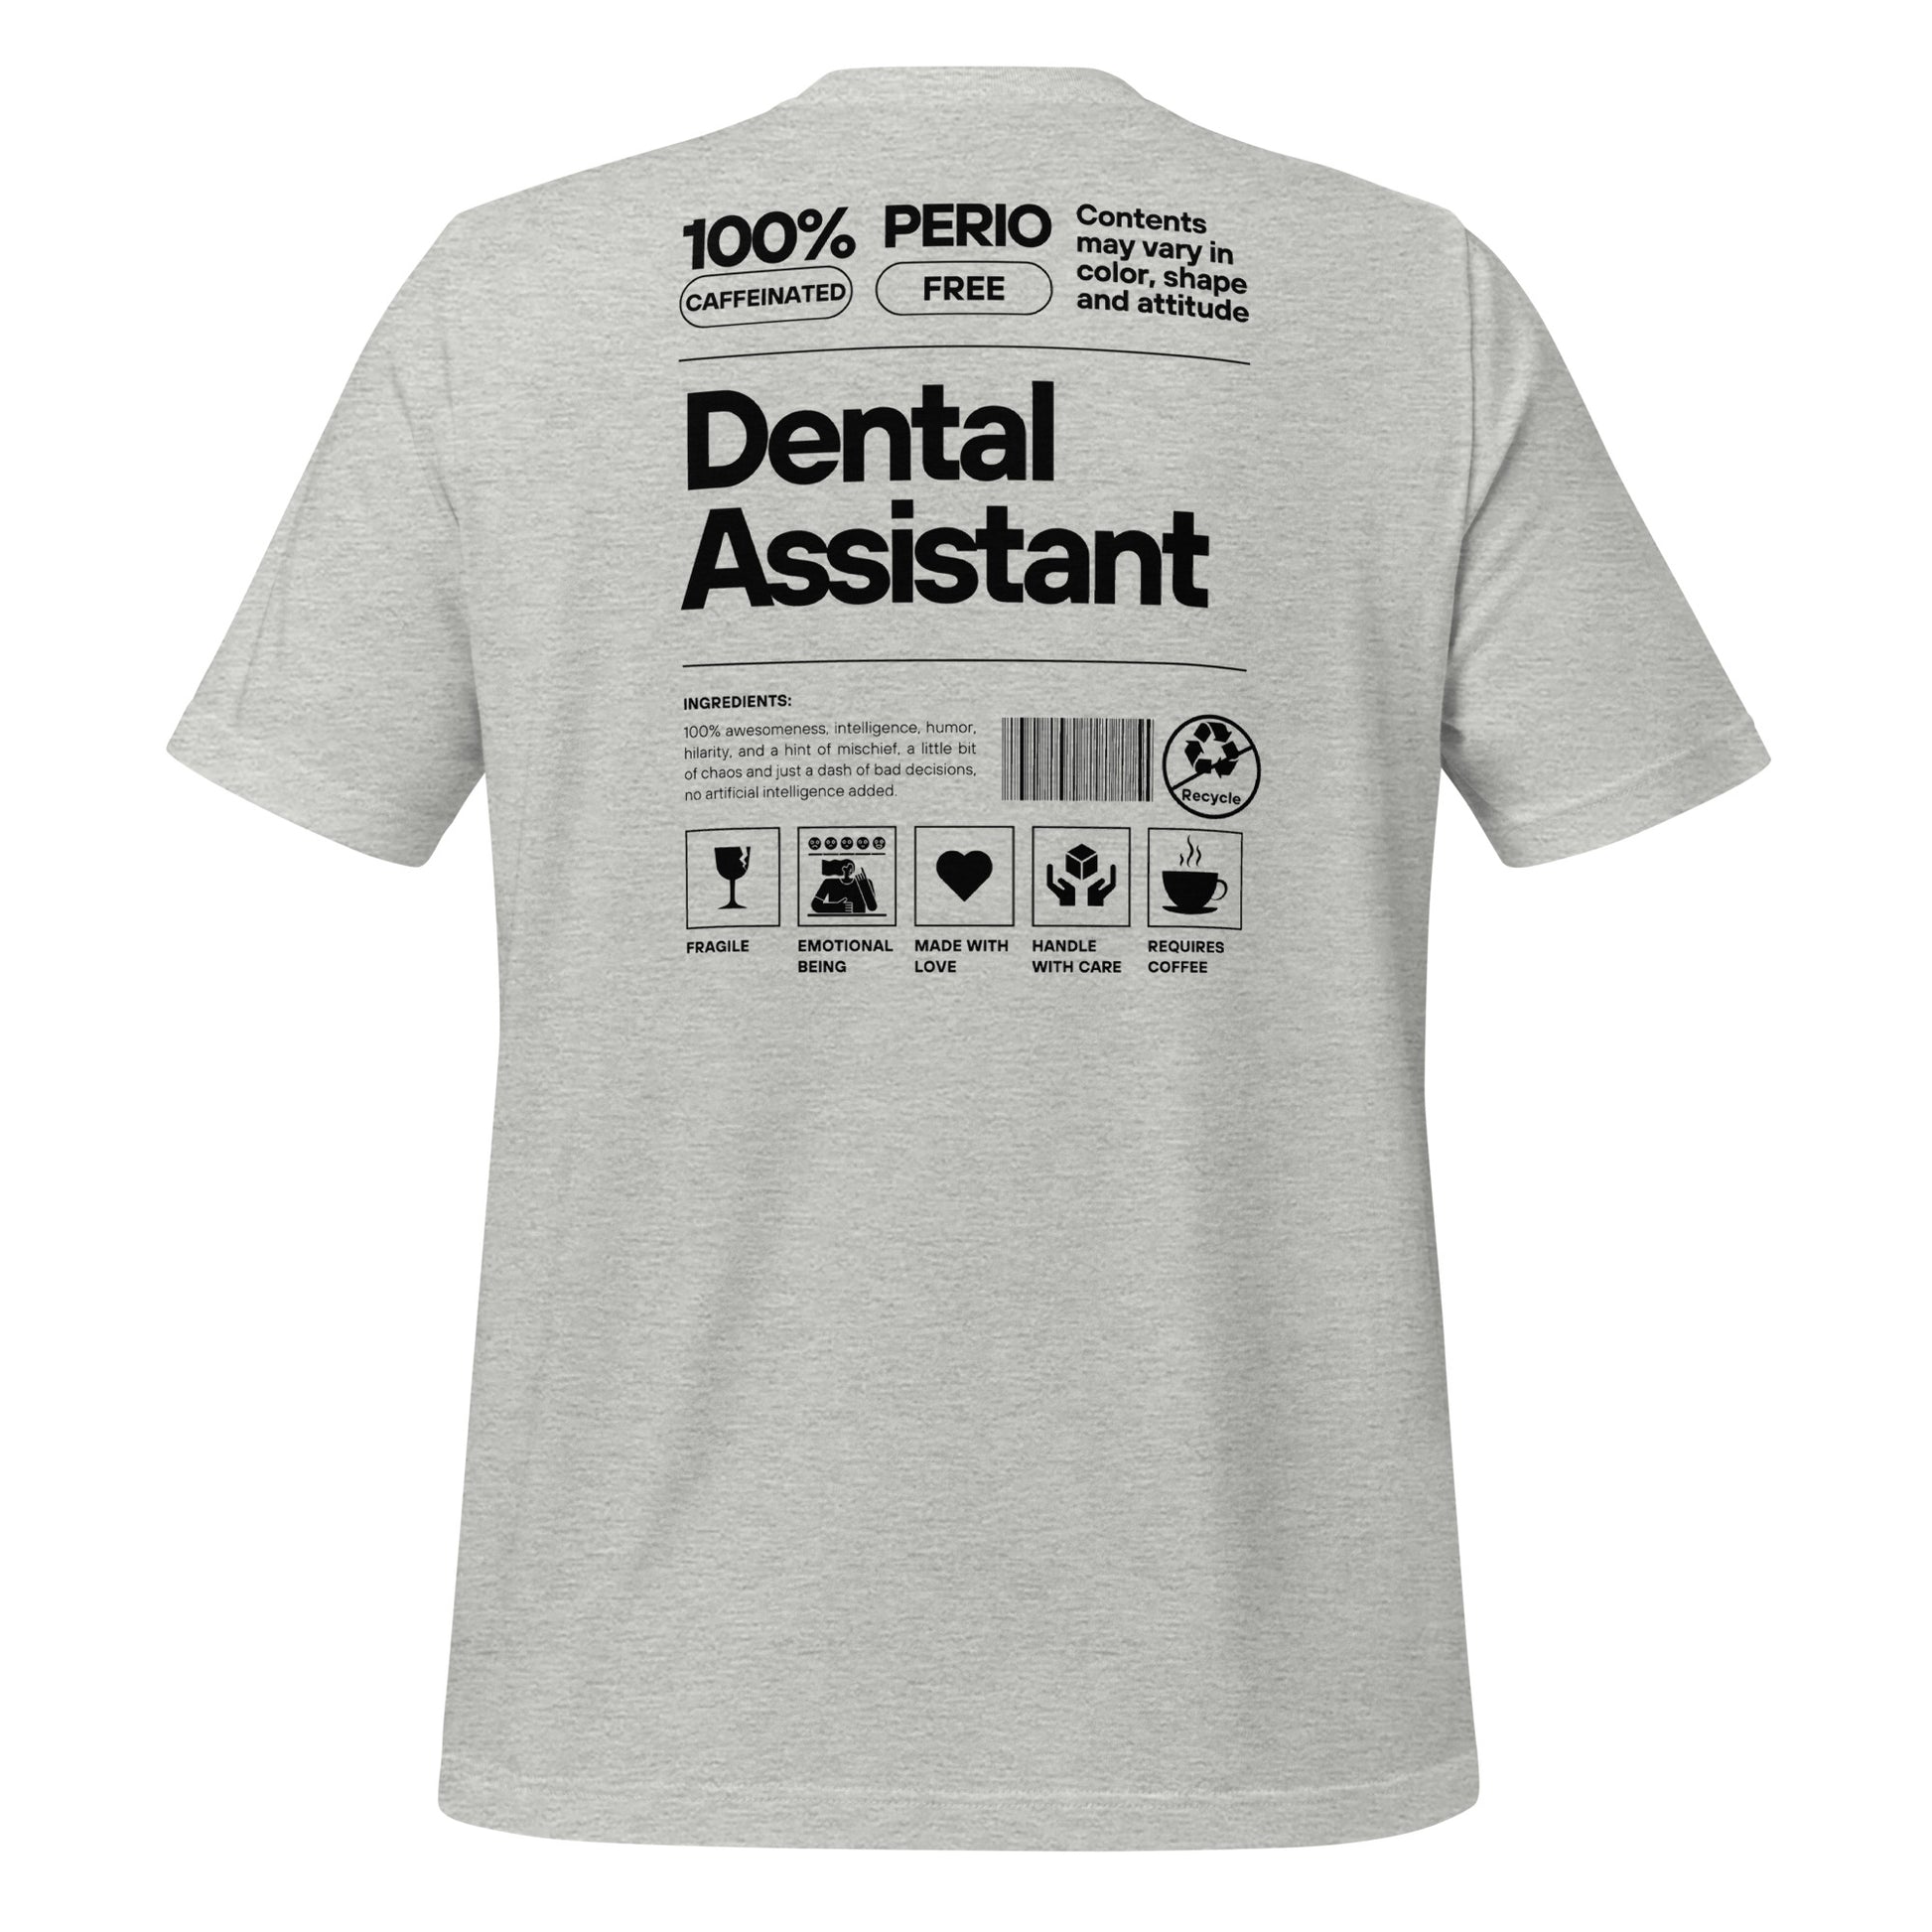 Athletic heather dental assistant shirt featuring a creative label design with icons and text, perfect for dental assistants who want to express their identity and passion for their job - dental shirts back view.